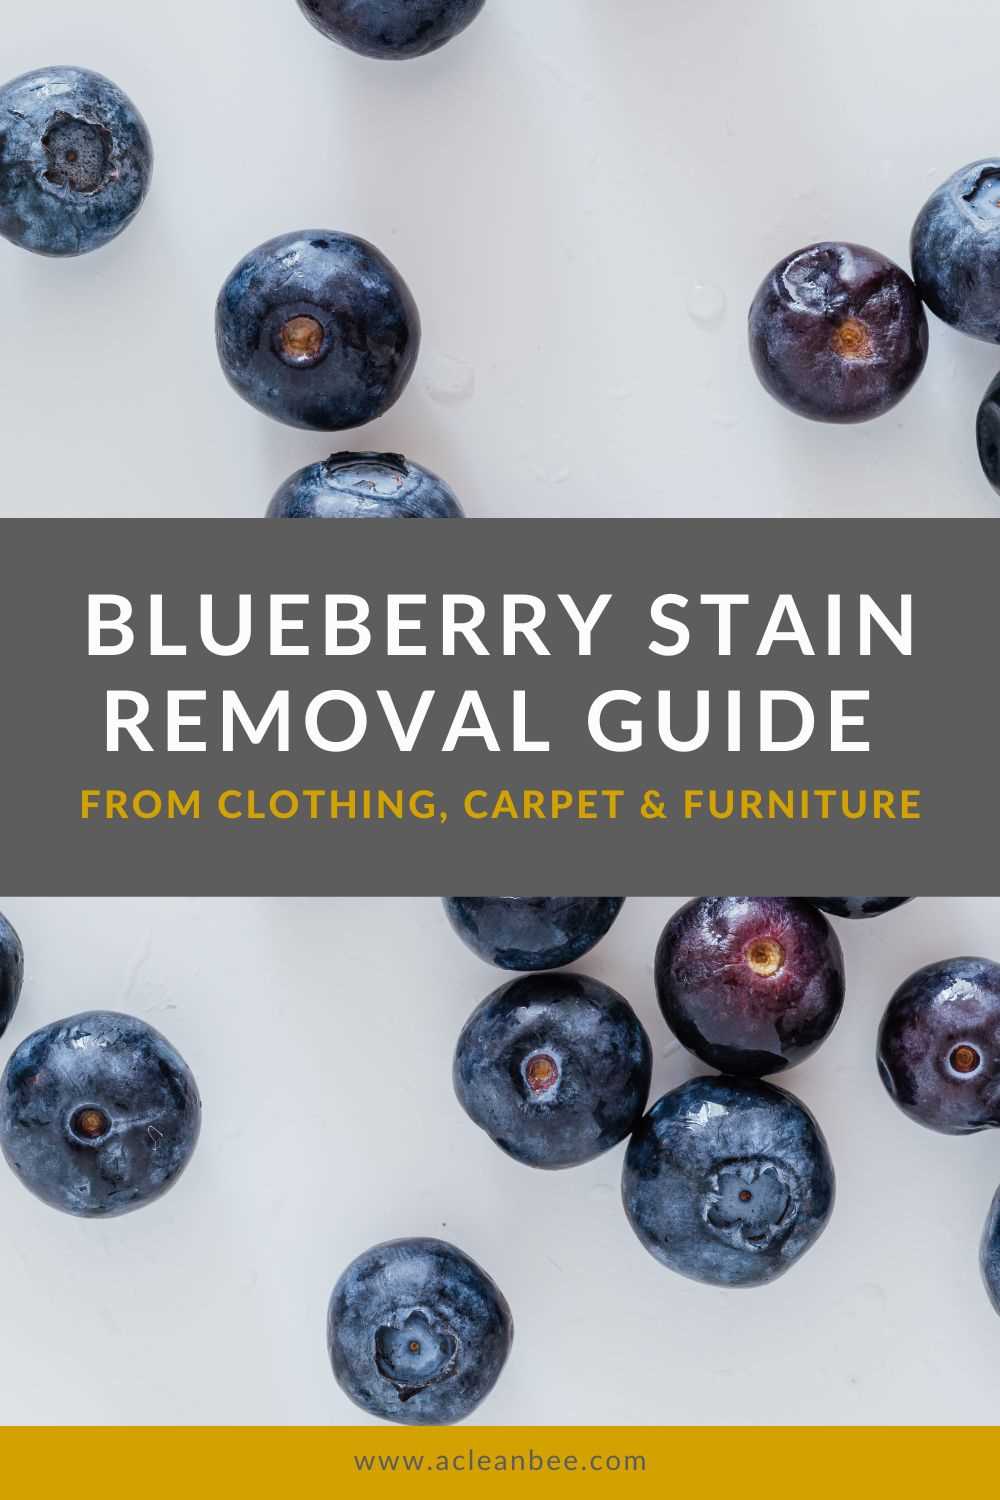 3. Apply Stain Remover